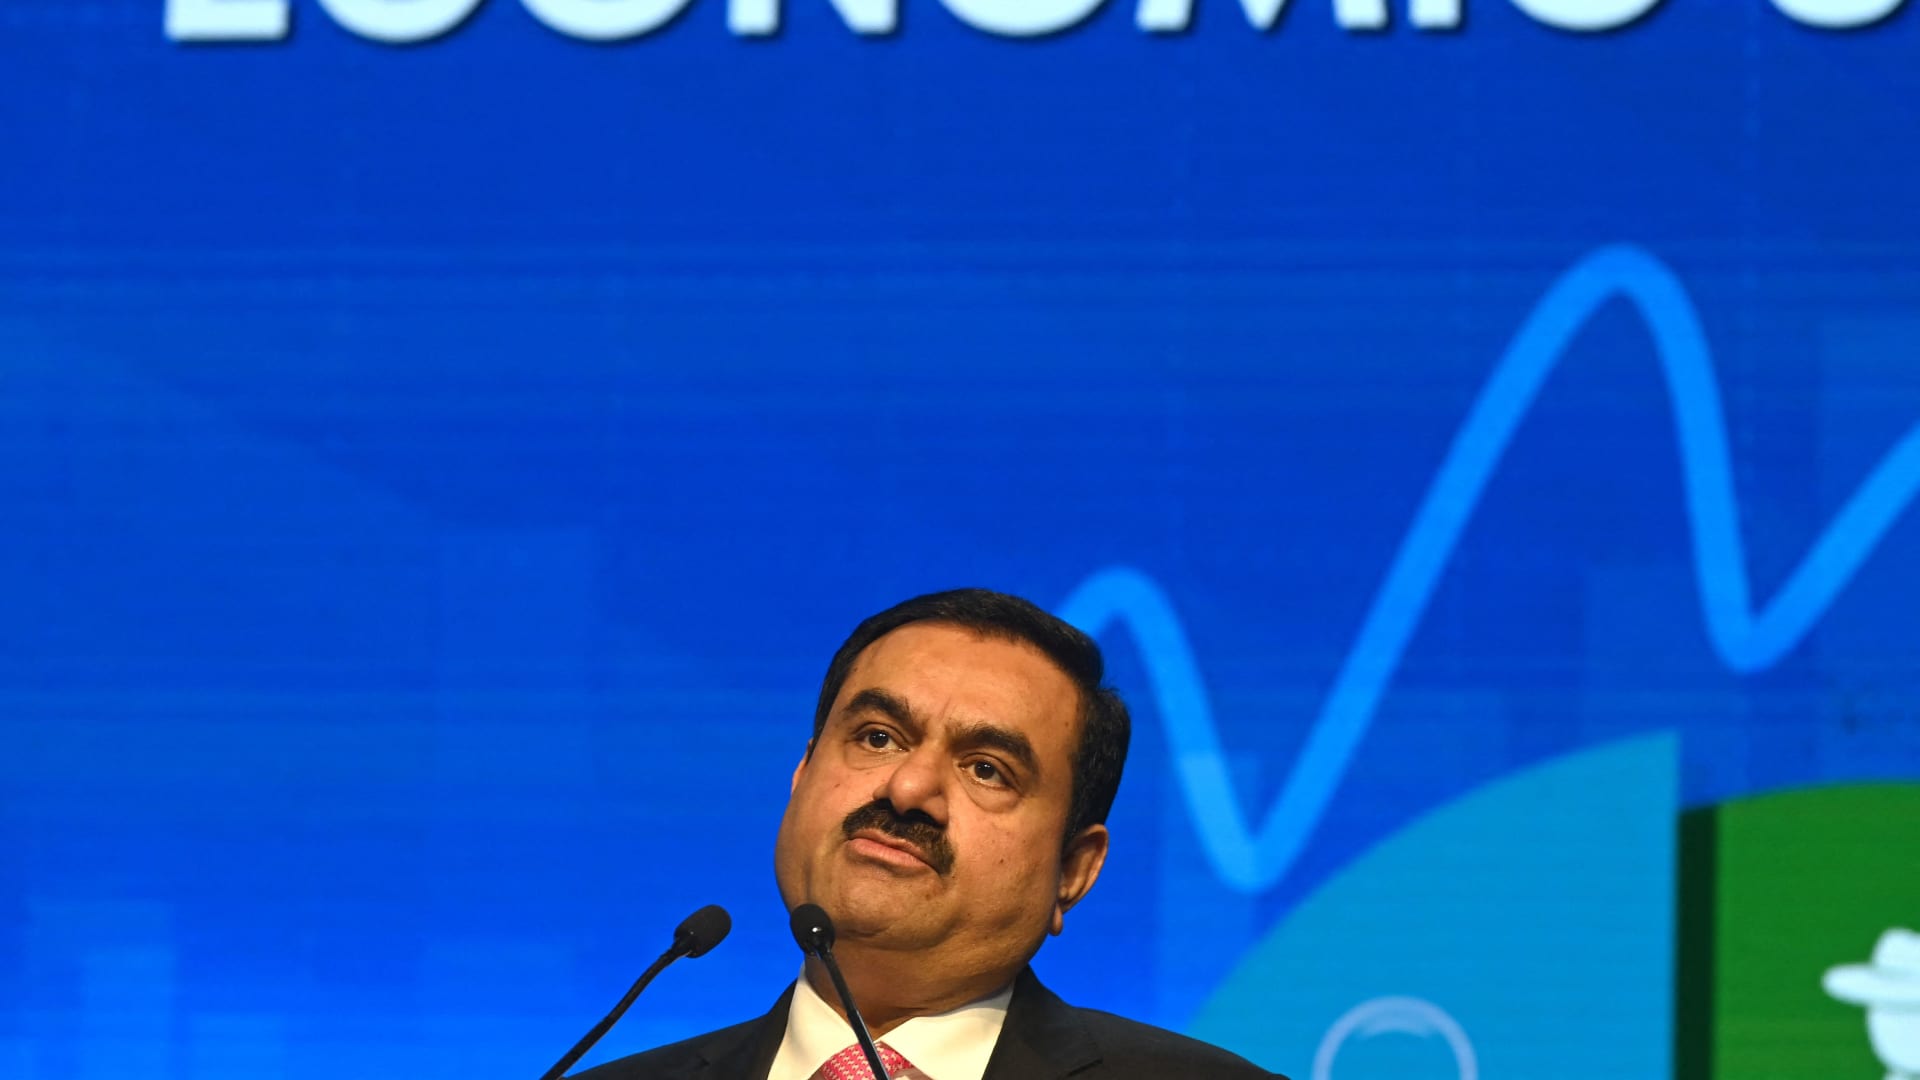 Most Adani shares continue bloodbath as Asia's richest man loses  billion in a month